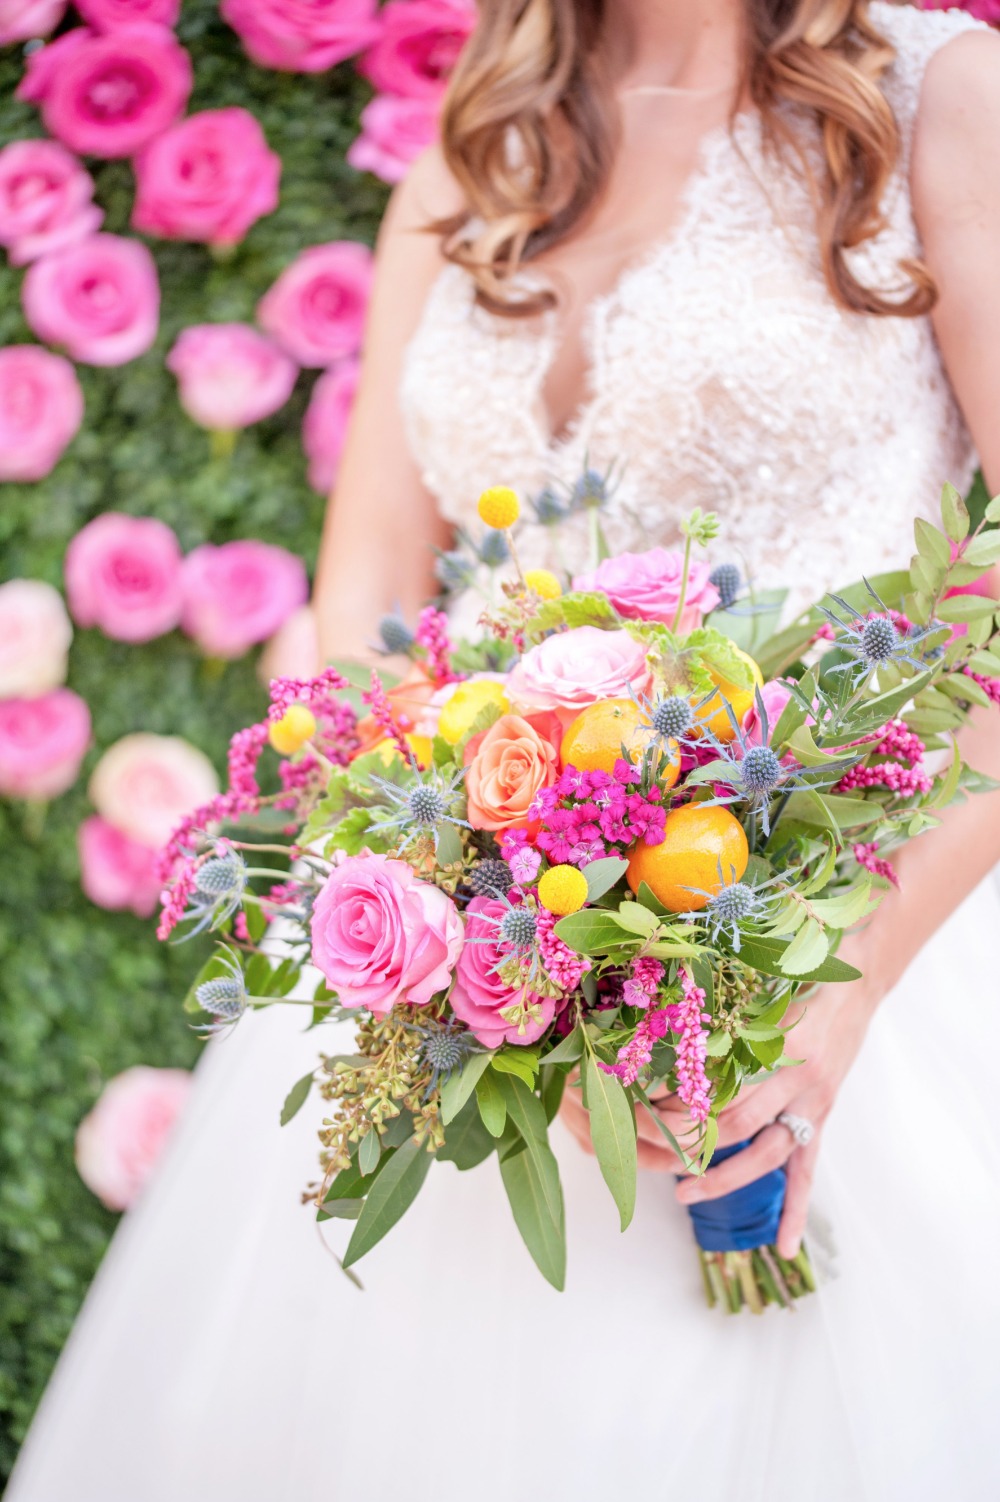 Bright and colorful wedding bouquet